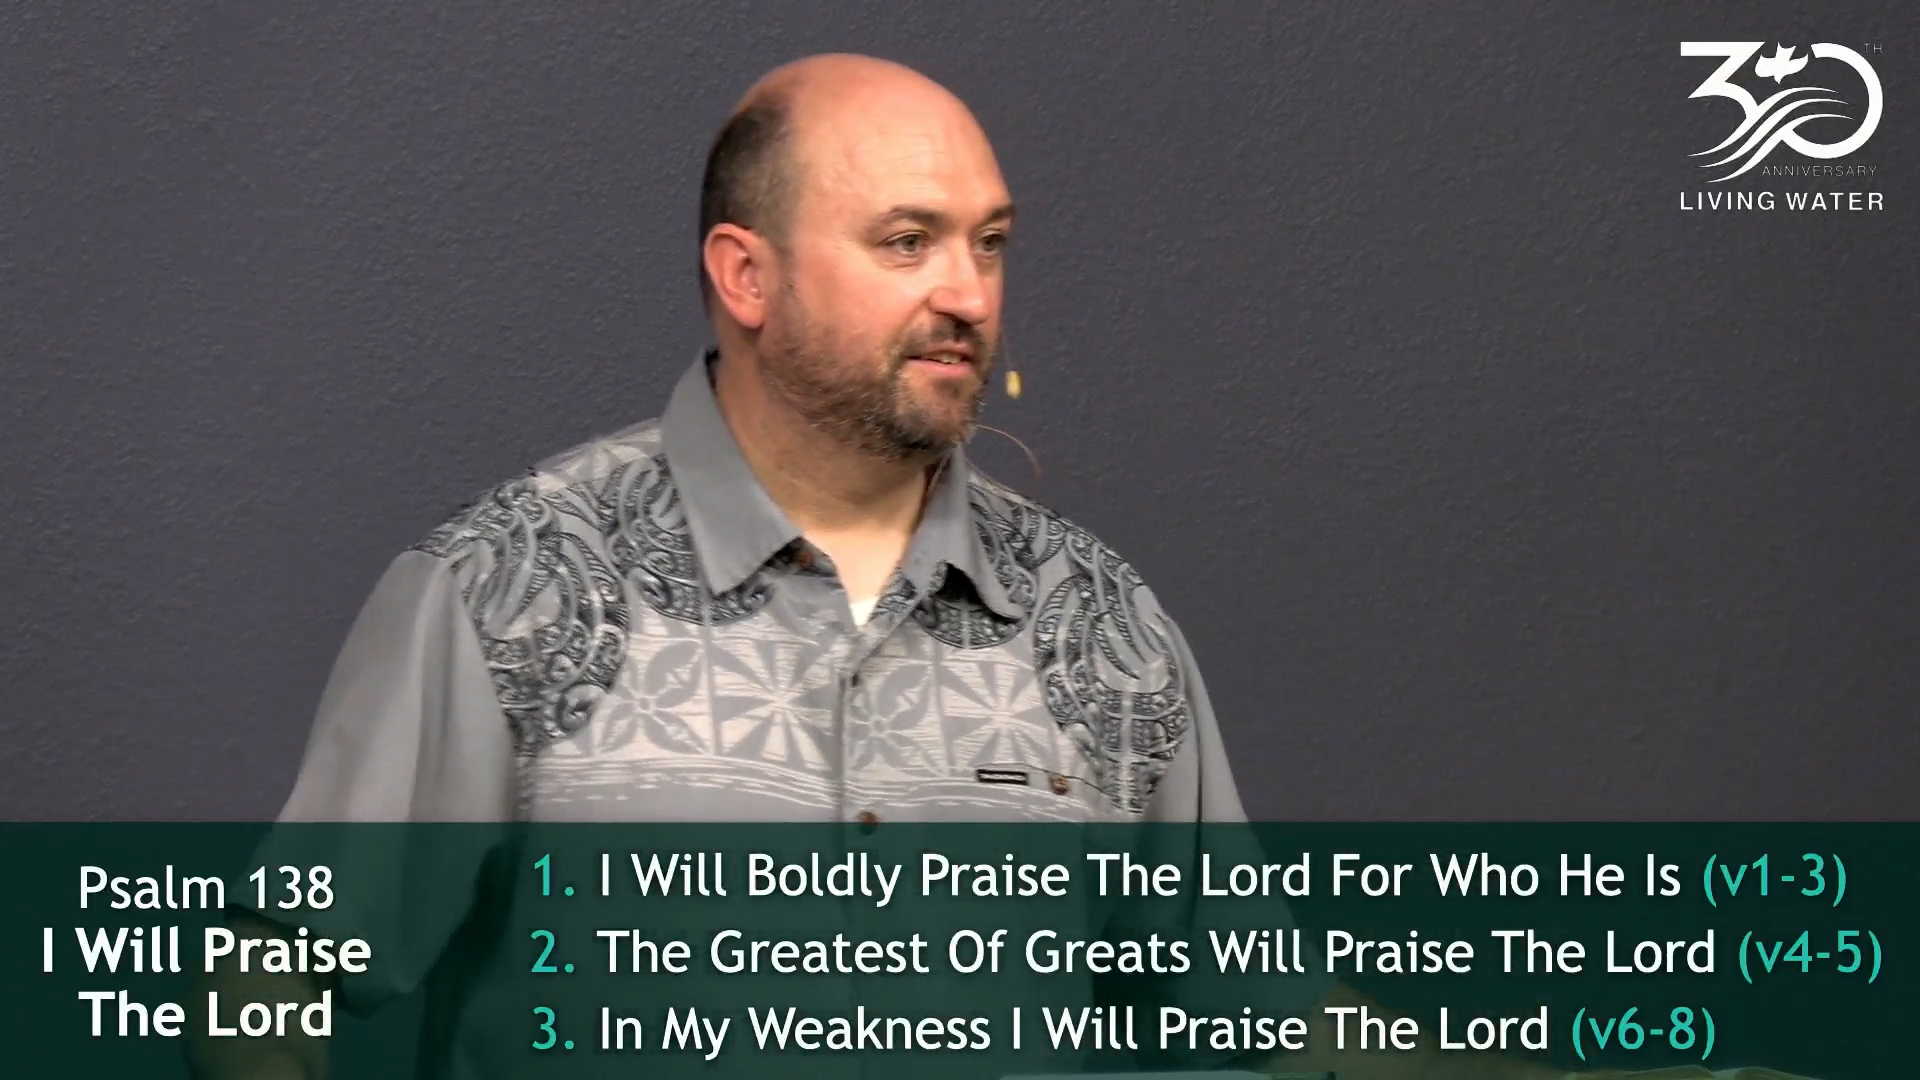 Pastor Jerry Simmons teaching Psalm 138, I Will Praise The Lord 1. I Will Boldly Praise The Lord For Who He Is (v1-3) 2. The Greatest Of Greats Will Praise The Lord (v4-5) 3. In My Weakness I Will Praise The Lord (v6-8)